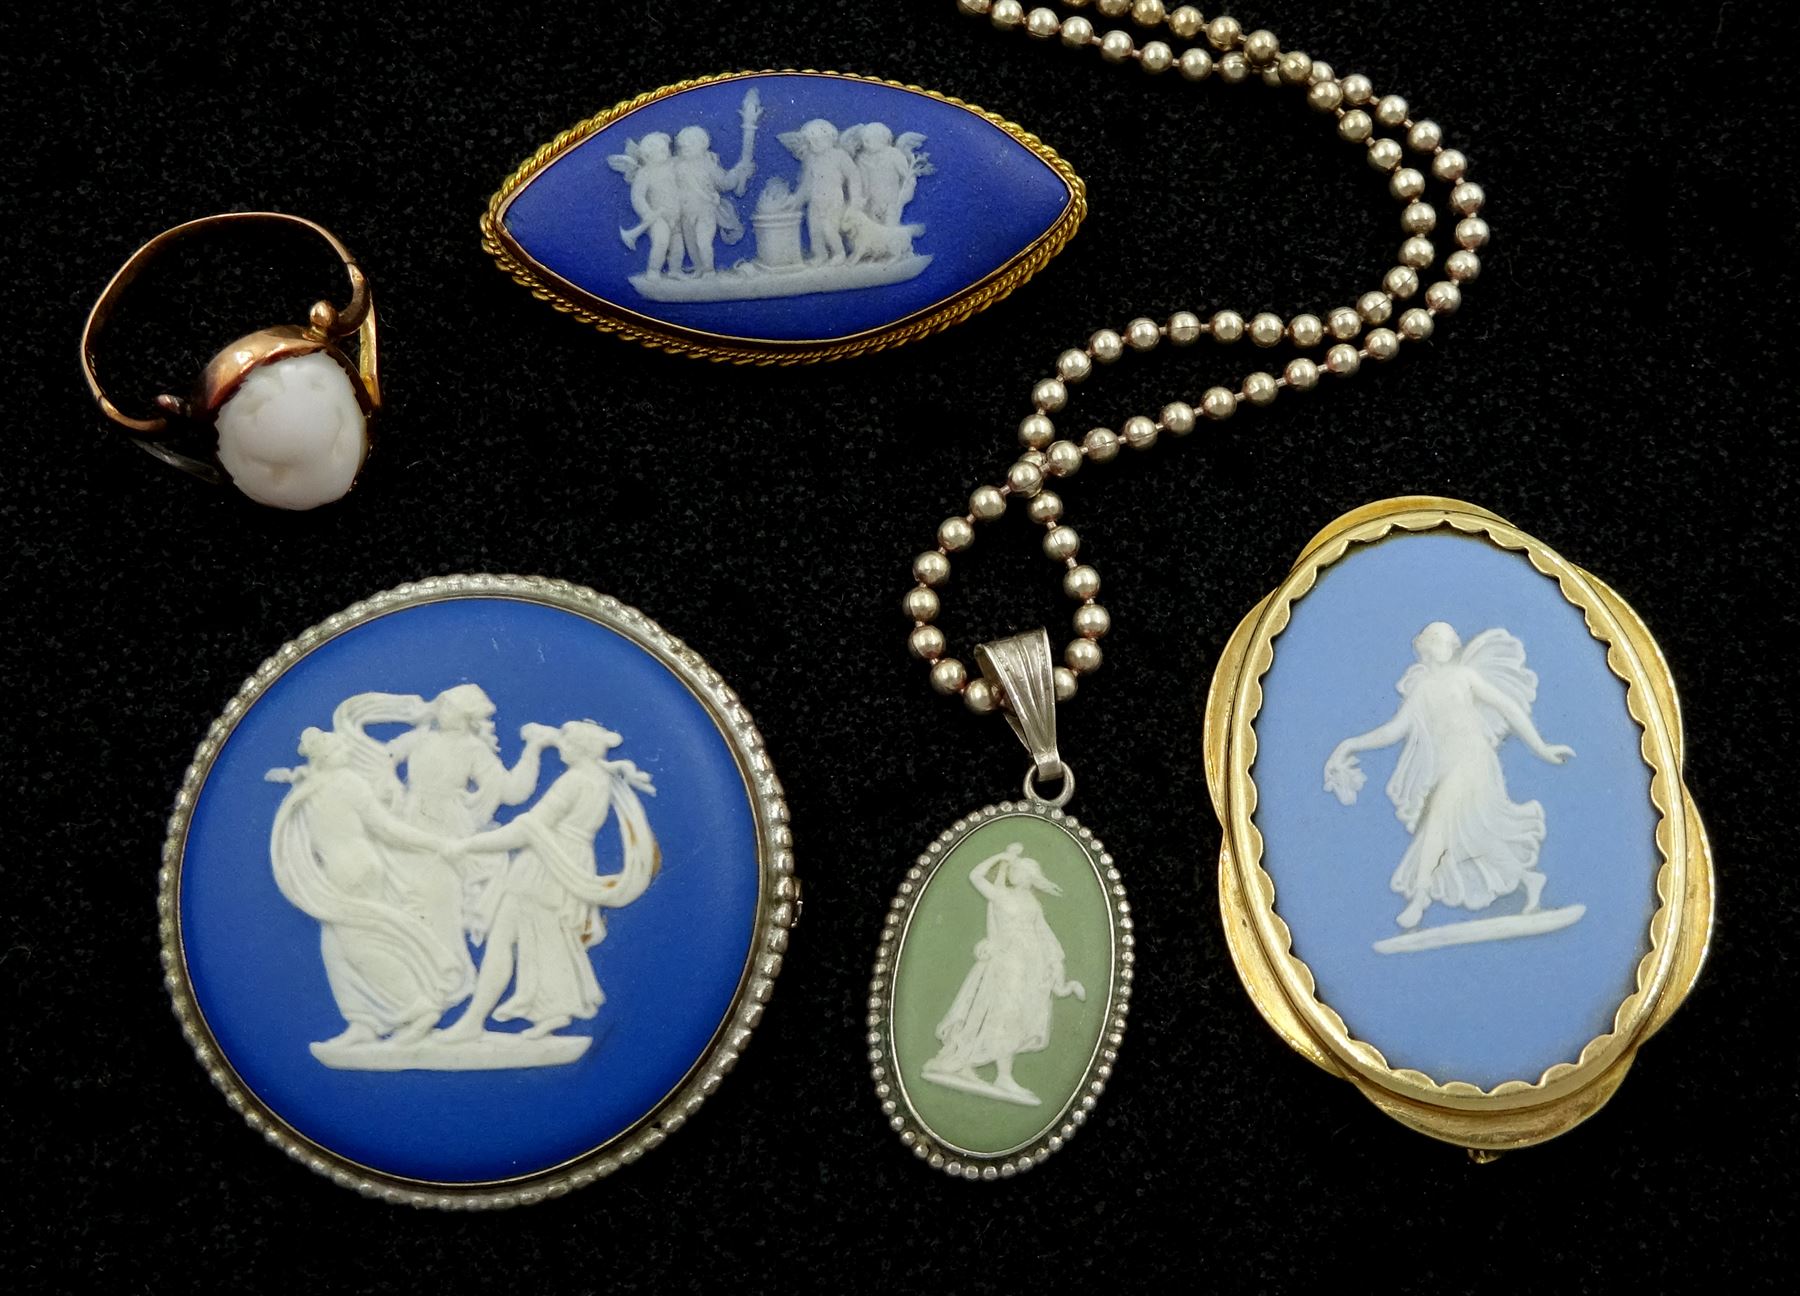 Wedgewood Jasperware jewellery including two 9ct gold brooches